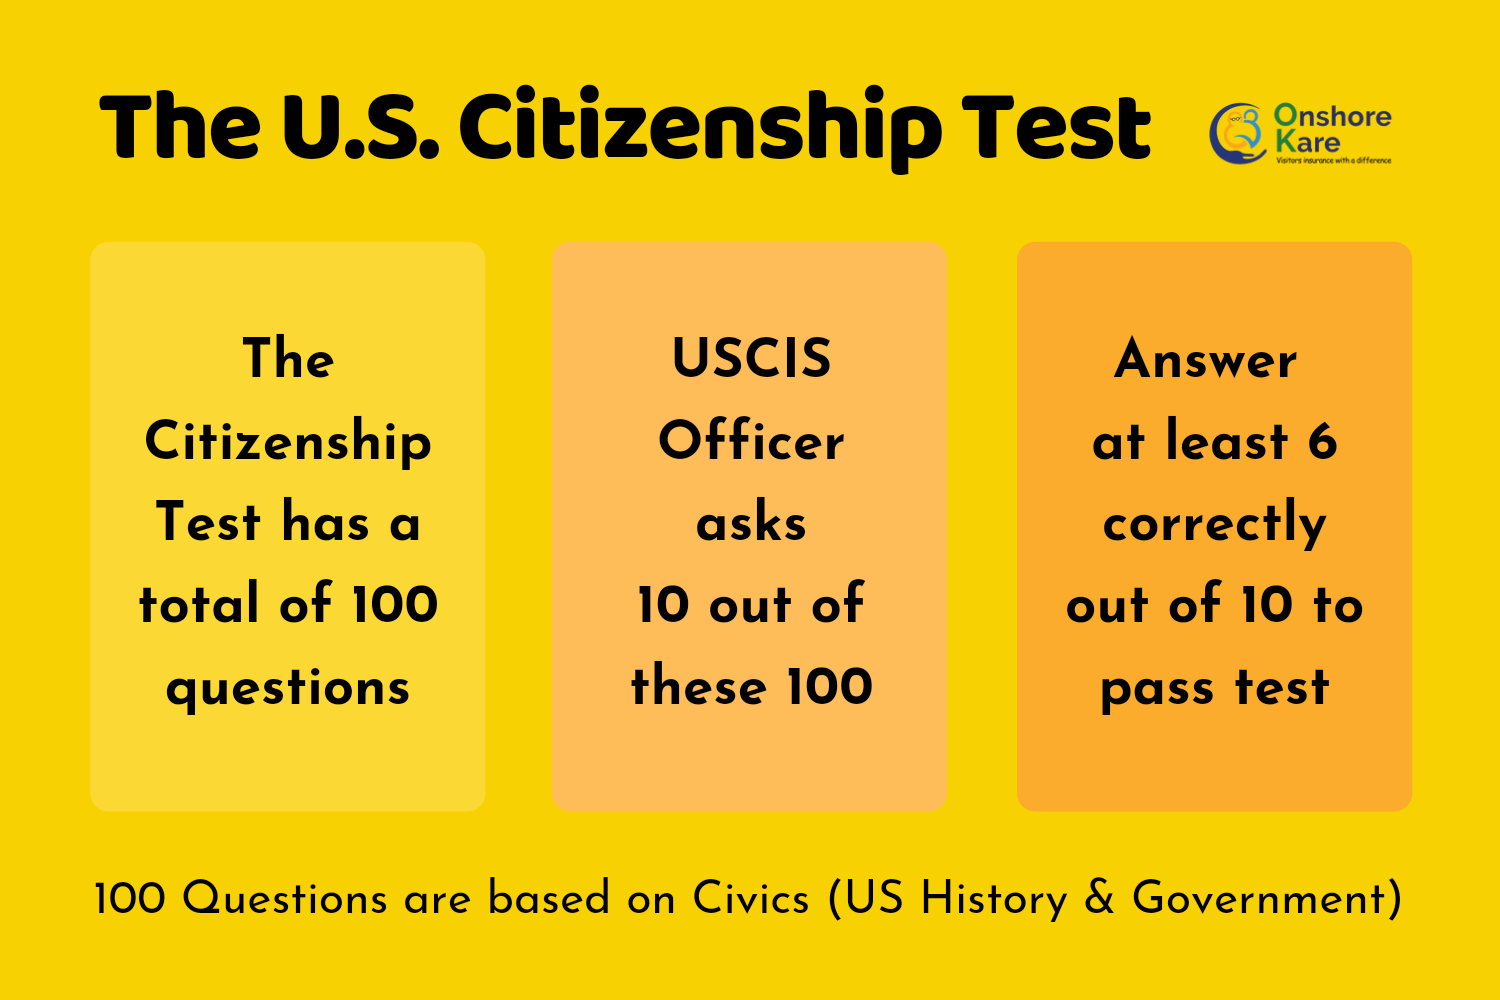 How to pass US Citizenship test